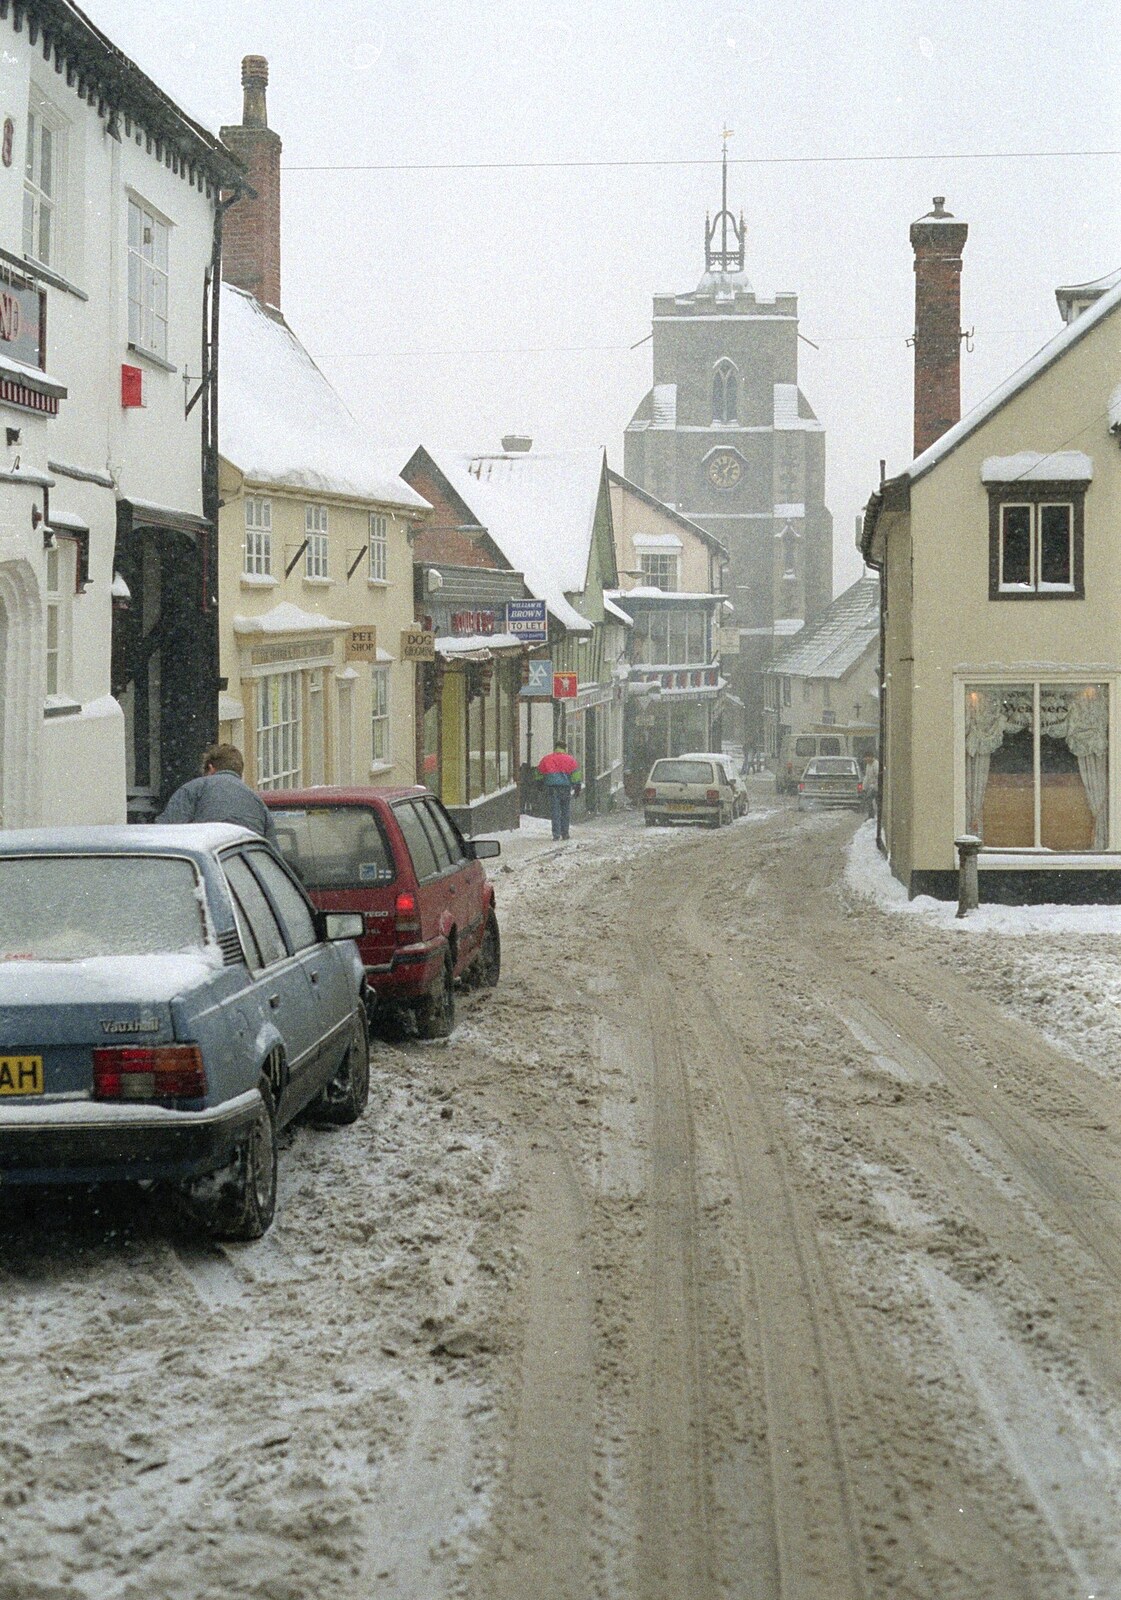 Cars in the snow on St. Nicholas Street from Sledging on the Common and Some Music, Stuston, Suffolk - 5th February 1991